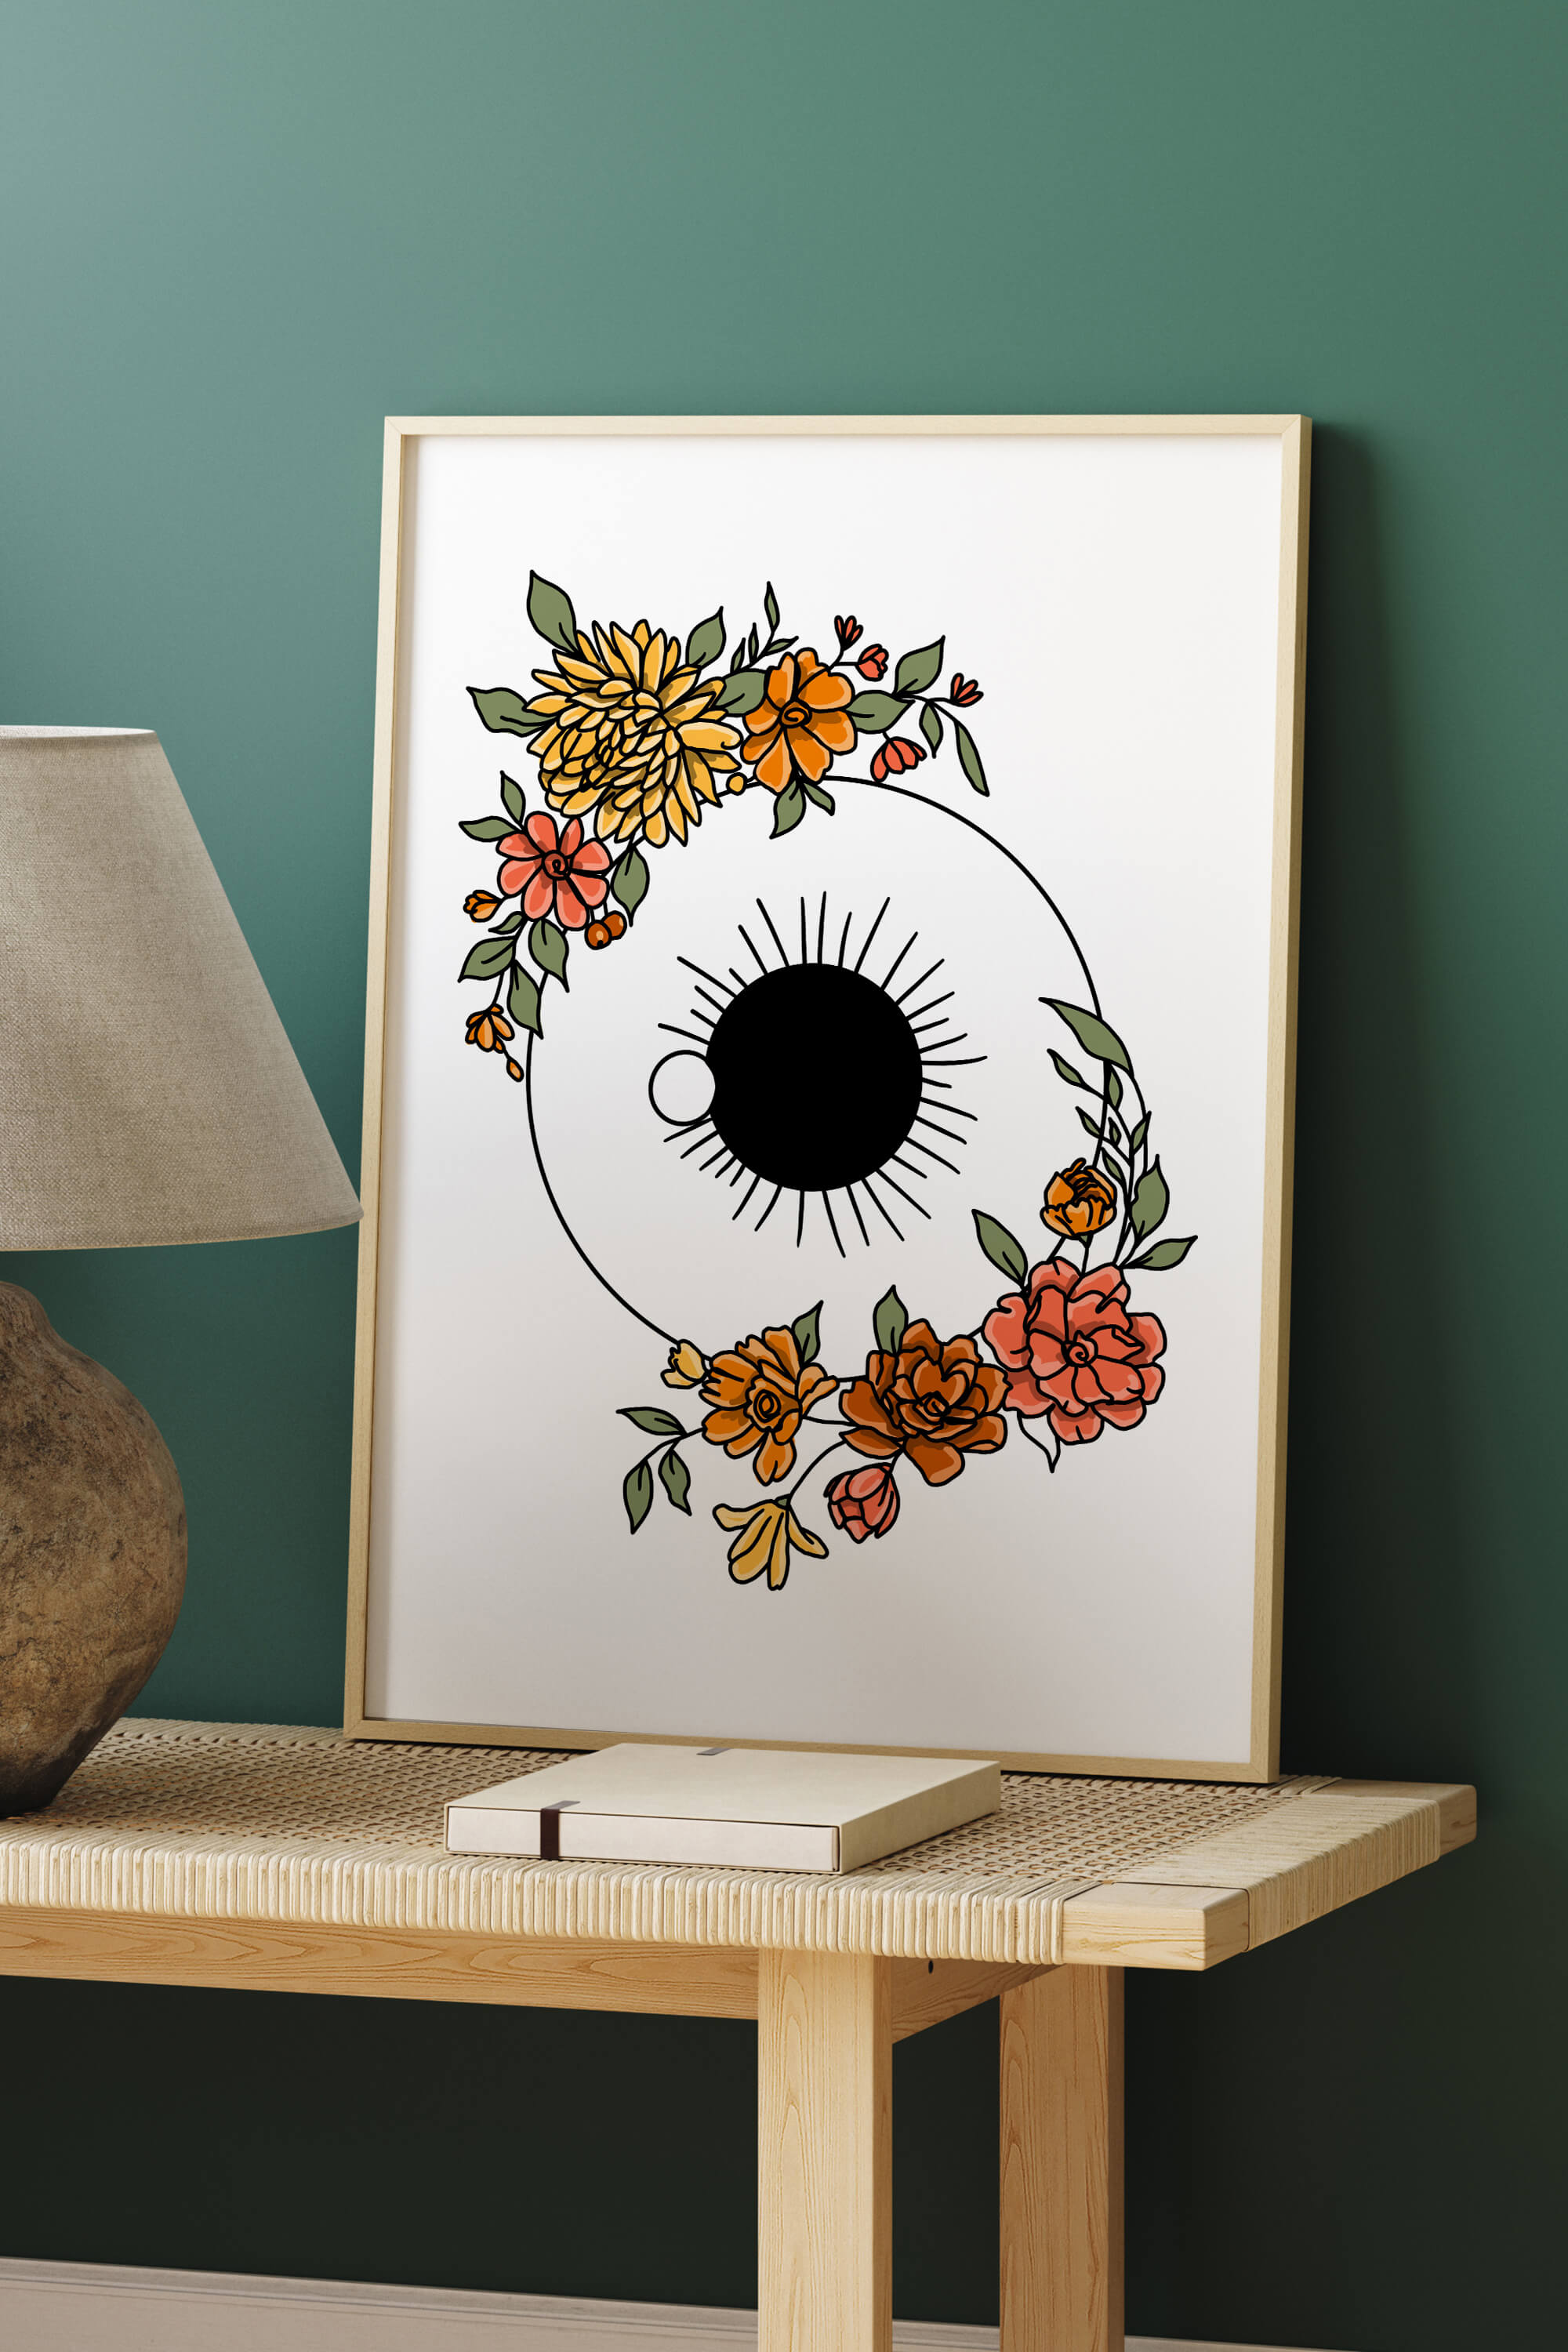 Awaken your senses with these artistic prints. Elevate your surroundings, evoke emotions, and redefine your aesthetic. Add these masterpieces to your cart and turn every look into a visual pleasure.